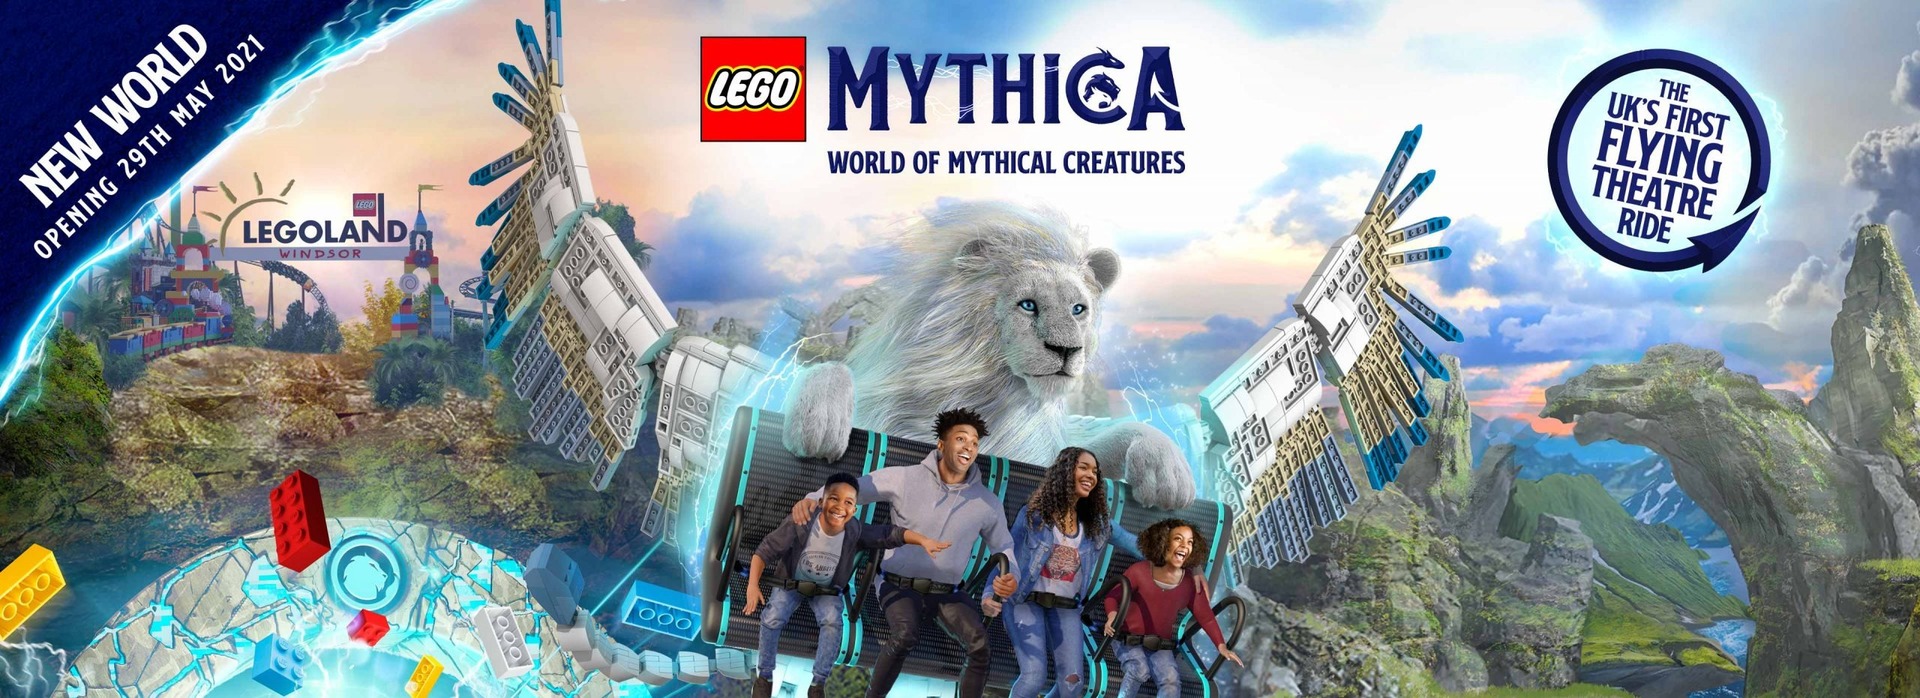 NEW world opening this May at LEGOLAND® Windsor Resort - MYTHICA